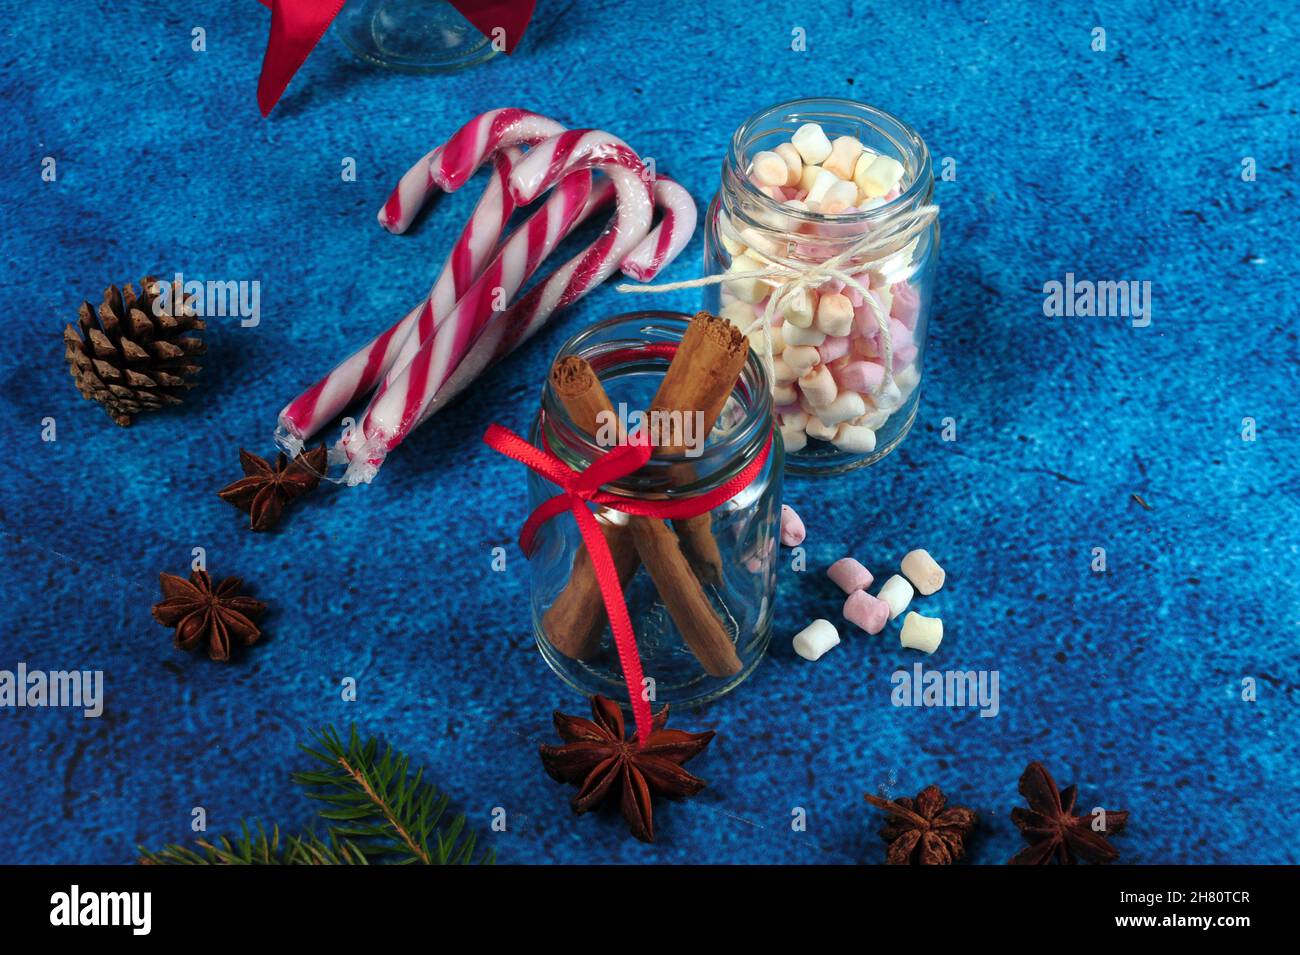 Jars filled with mini marshmallows and cinnamon sticks, and pinecone on a blue surface Stock Photo